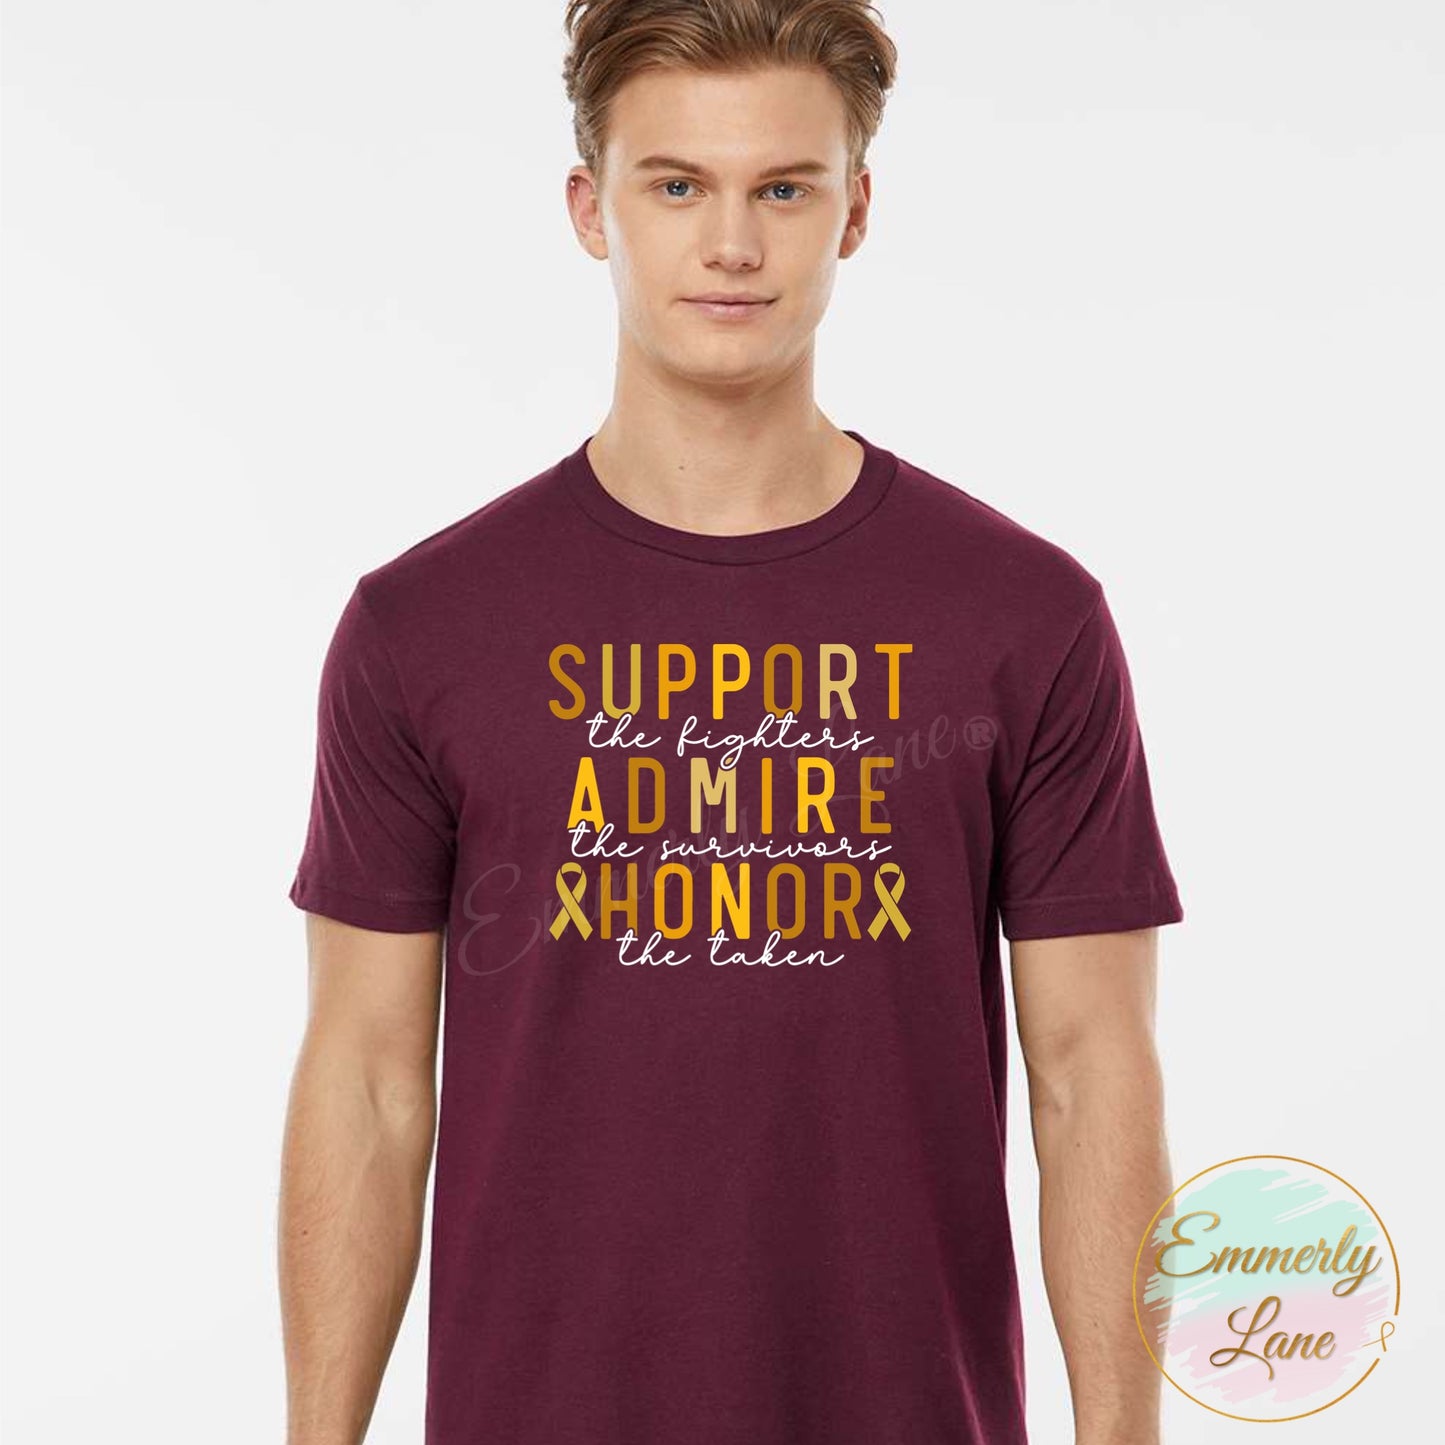 Support Admire Honor Shirt- Gold